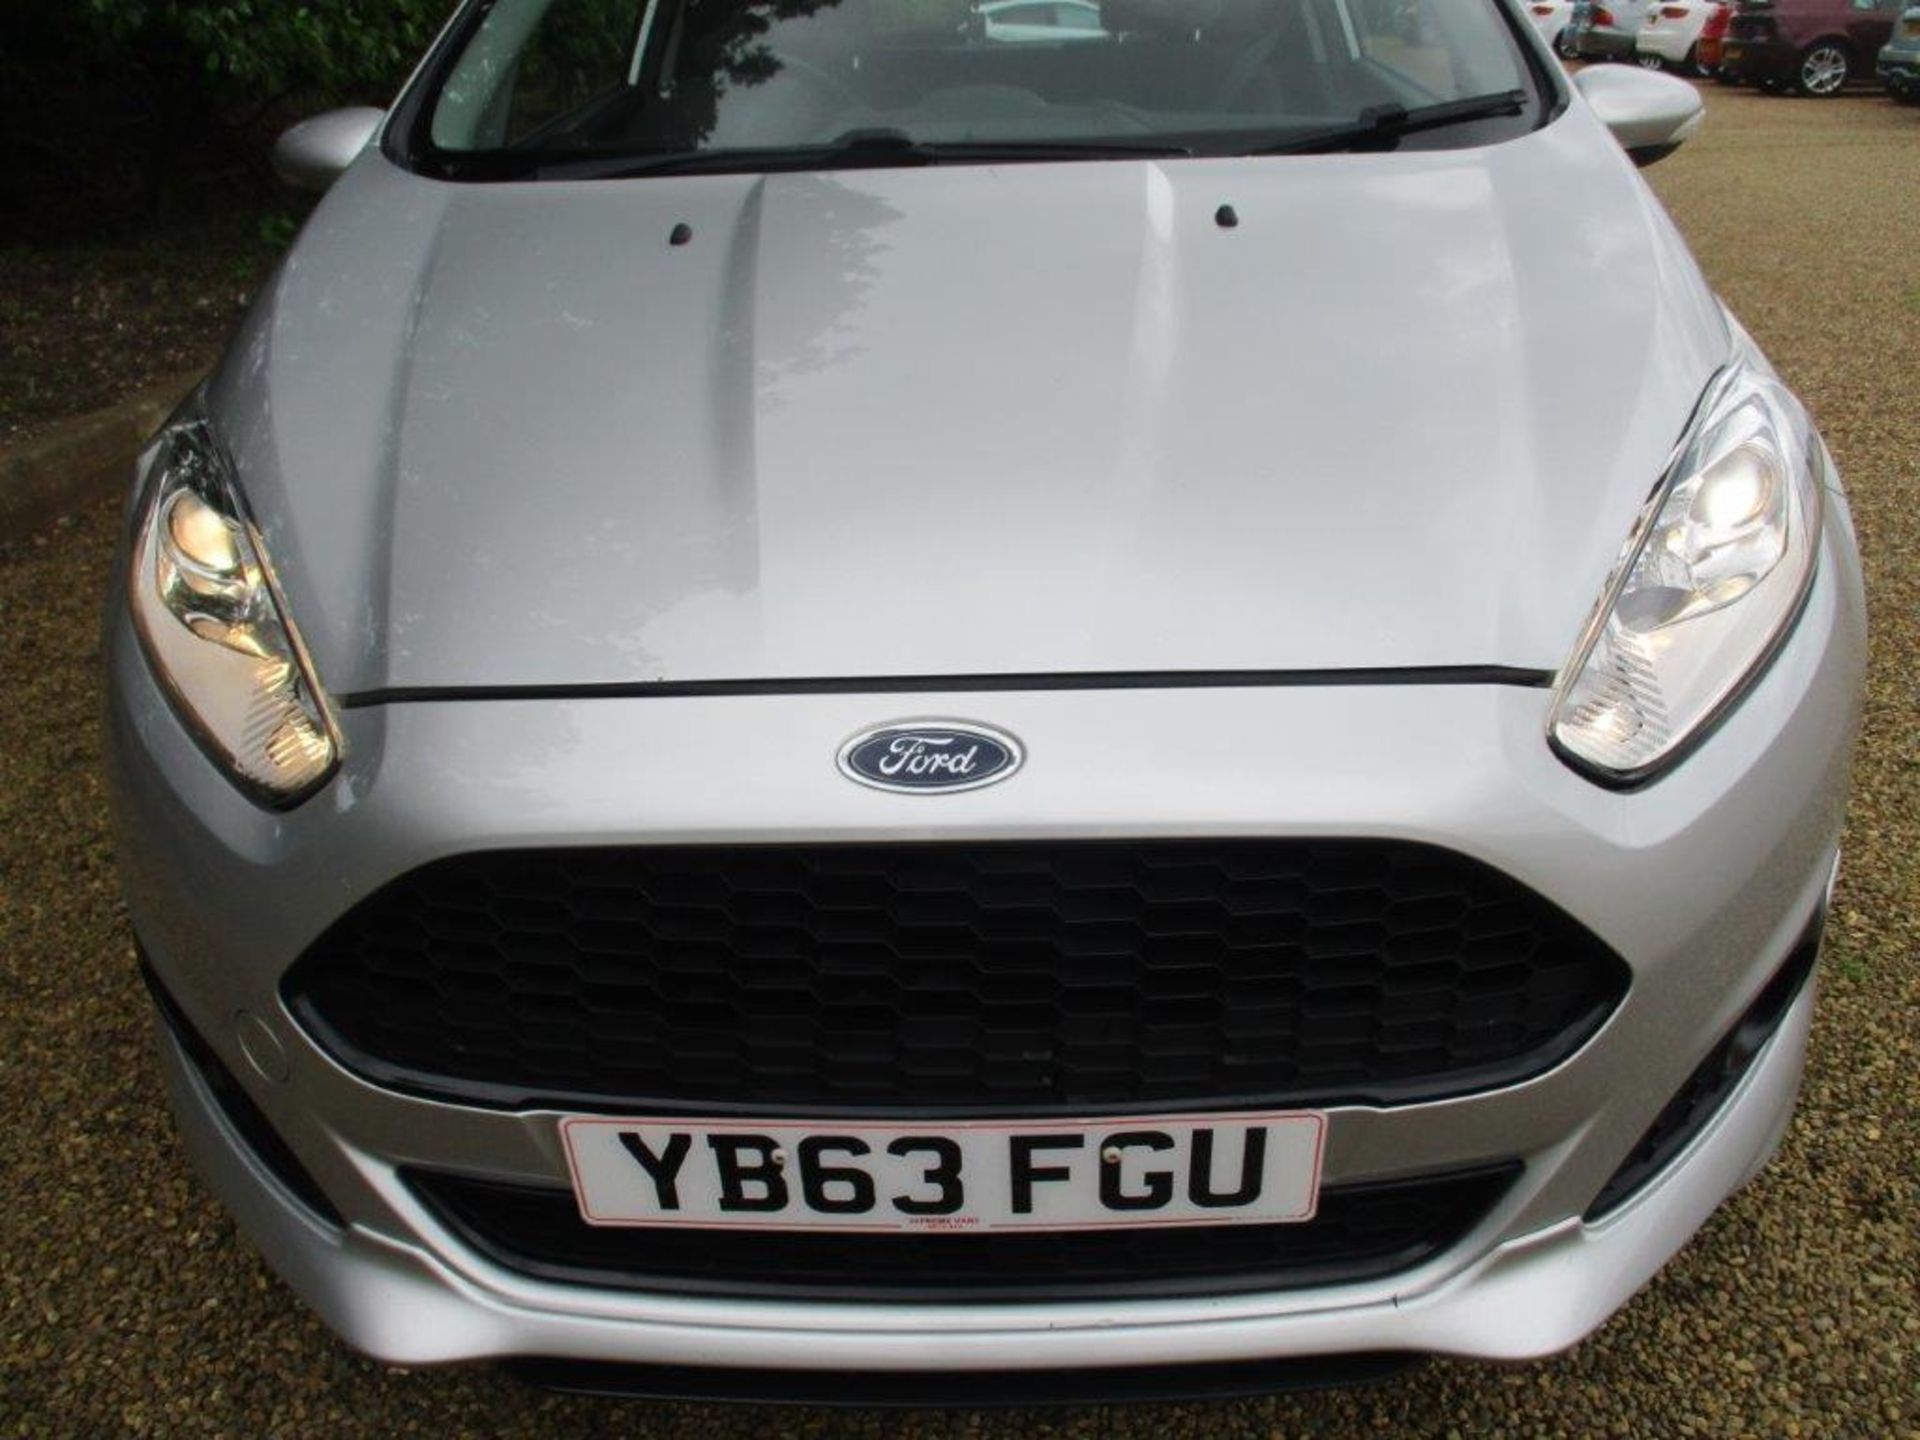 63 14 Ford Fiesta Sport TDCI - Image 8 of 23